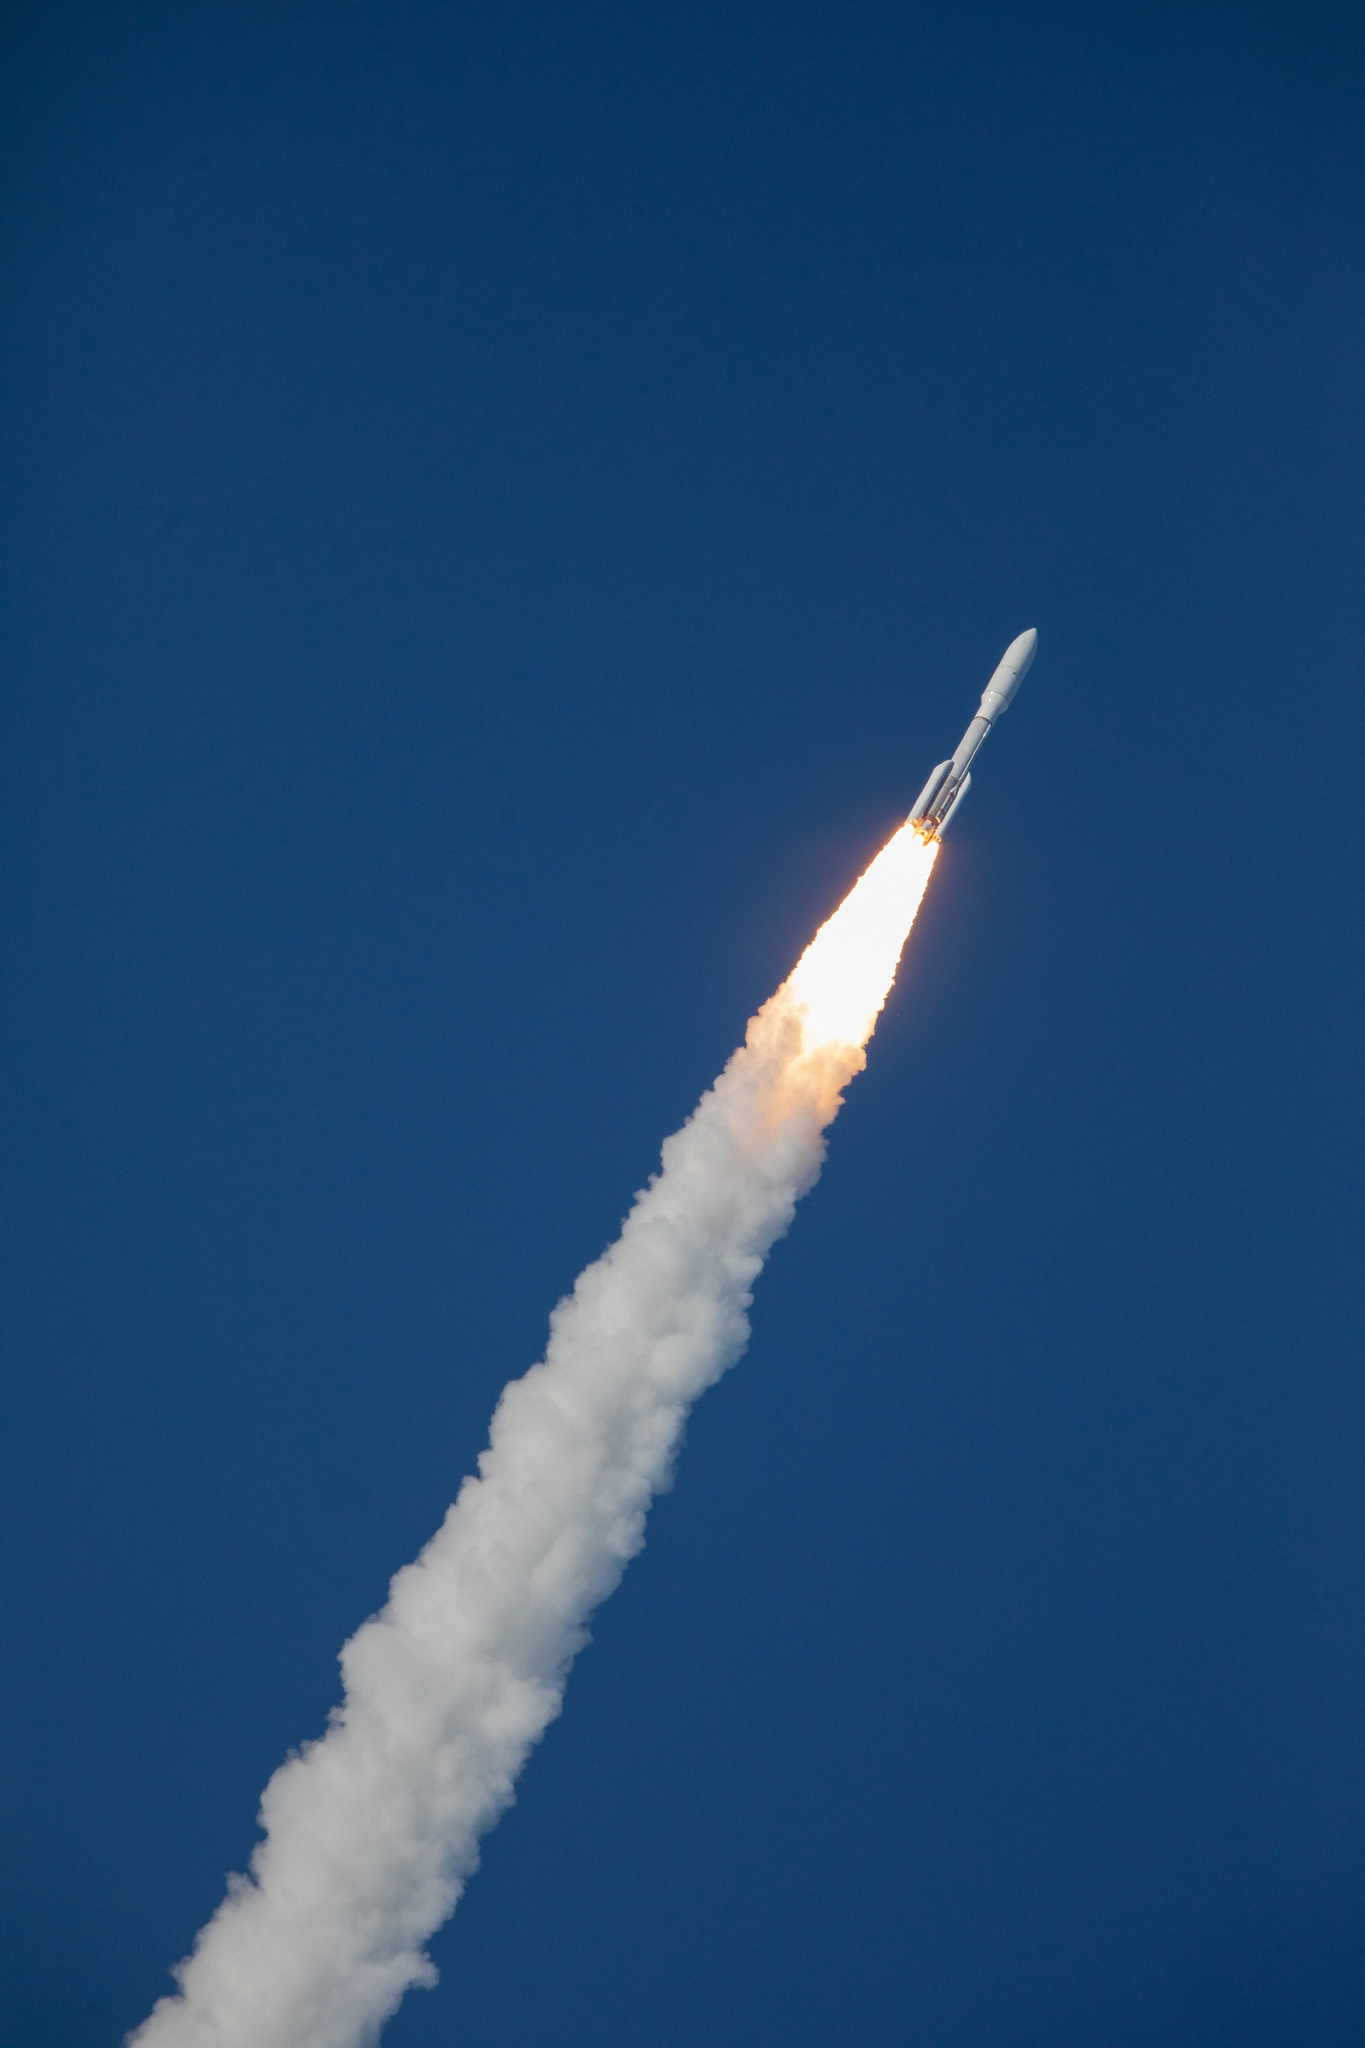 Launch vehicle in air